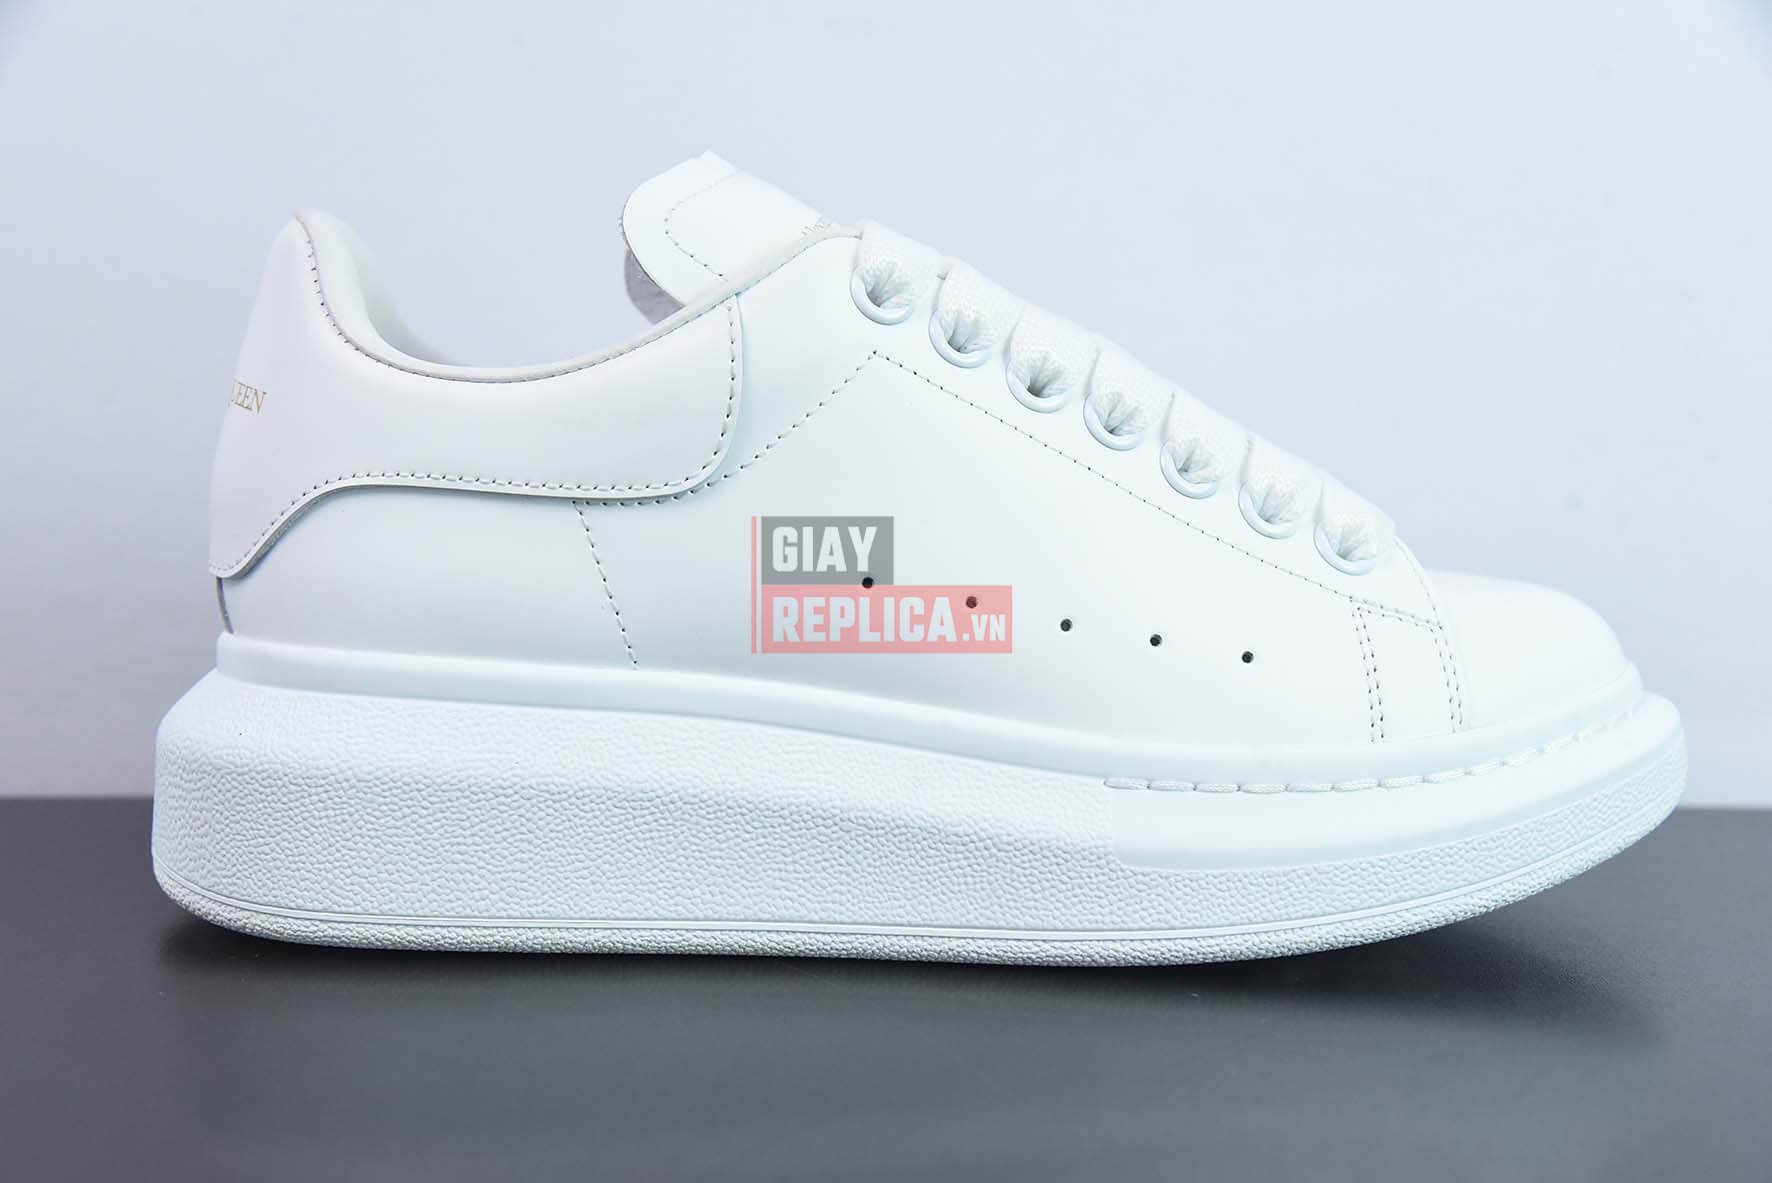 Giày Alexander Mcqueen All White Like Auth